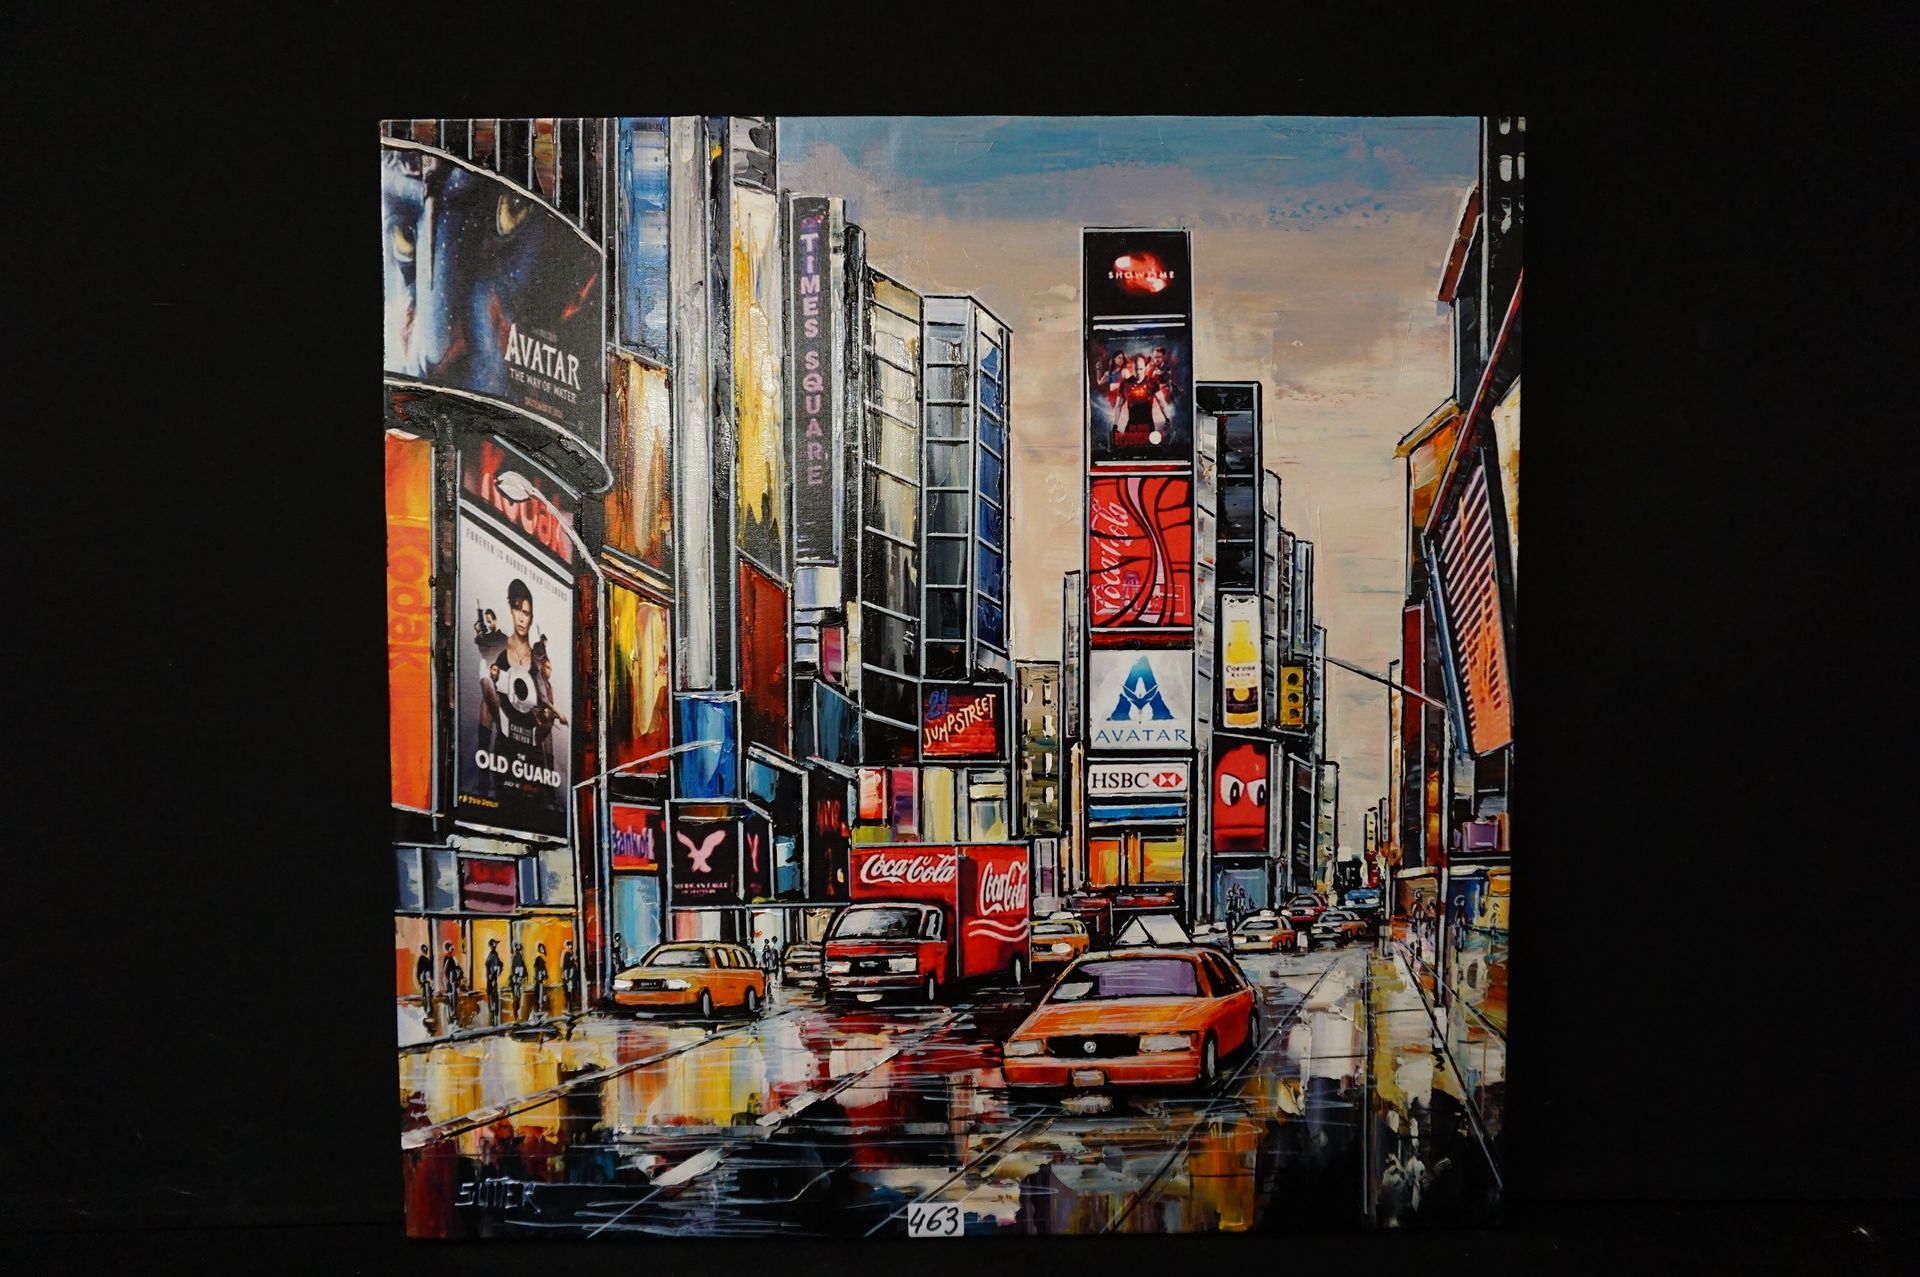 SUTTER (1975 - ) "New York" - Time Square" - Oil on canvas - Signed - 80 x 80 cm